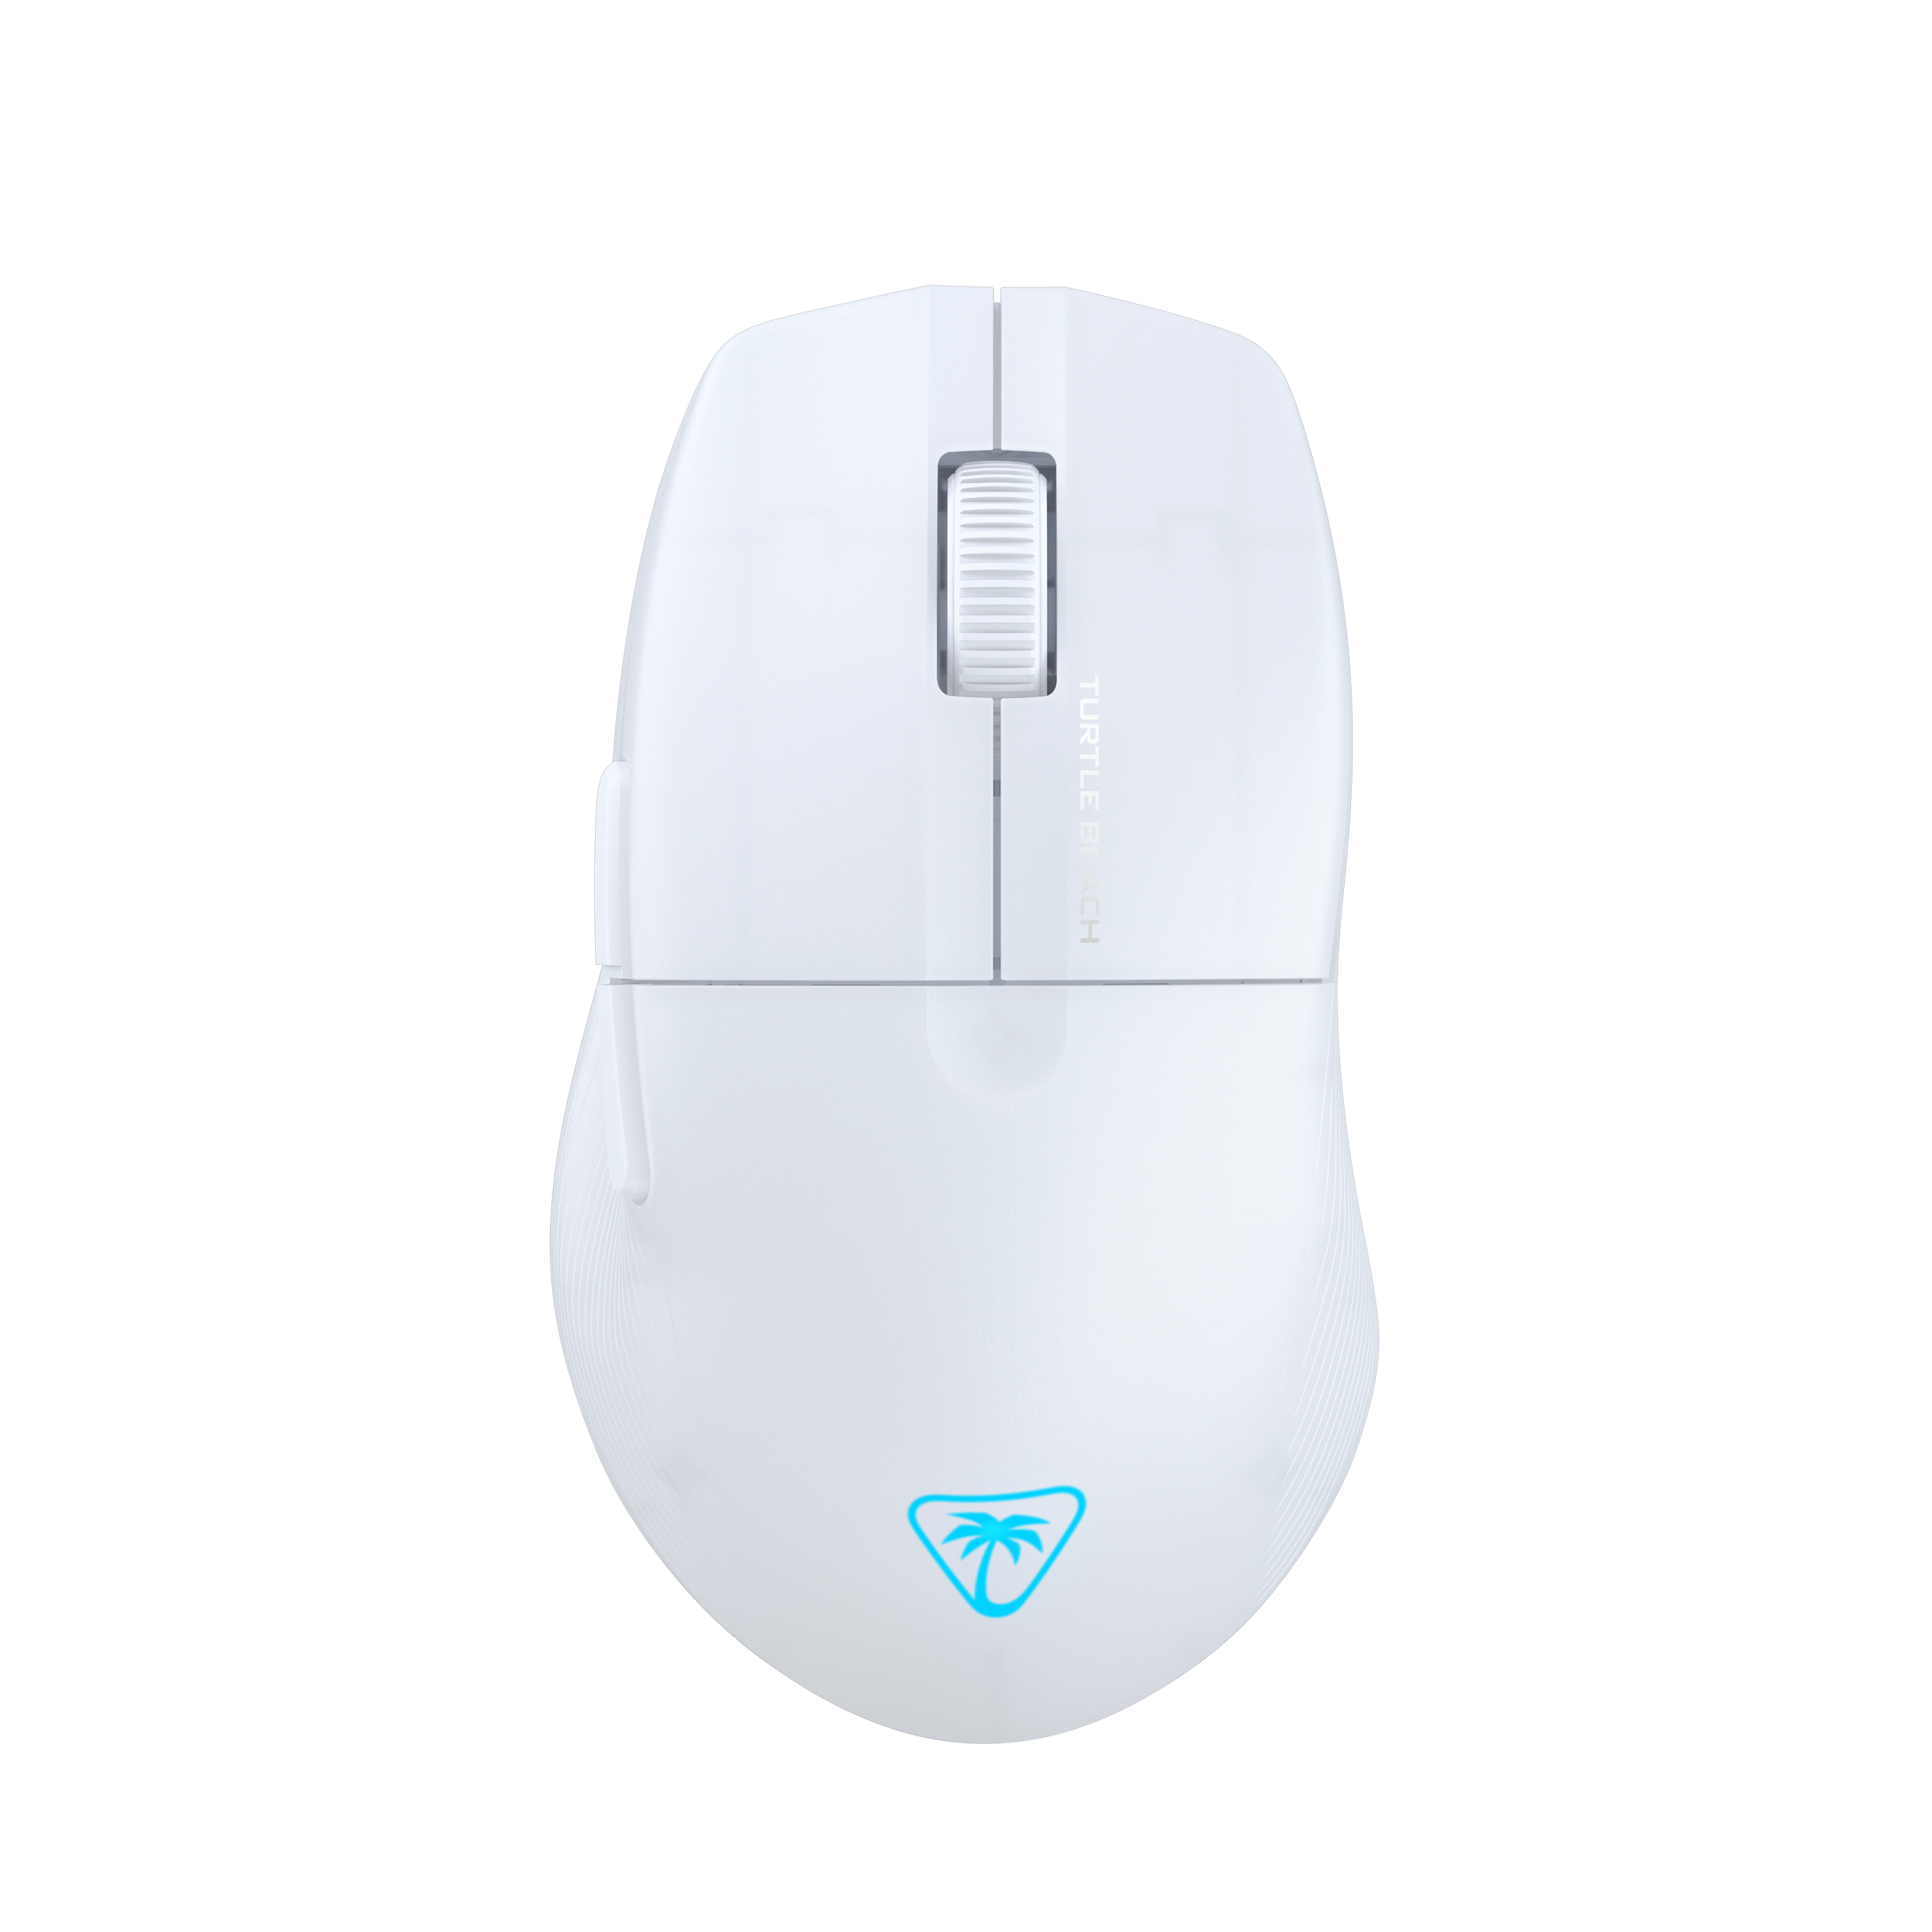 TURTLE BEACH Pure Air TBM-1102-15 Gaming Mouse, White